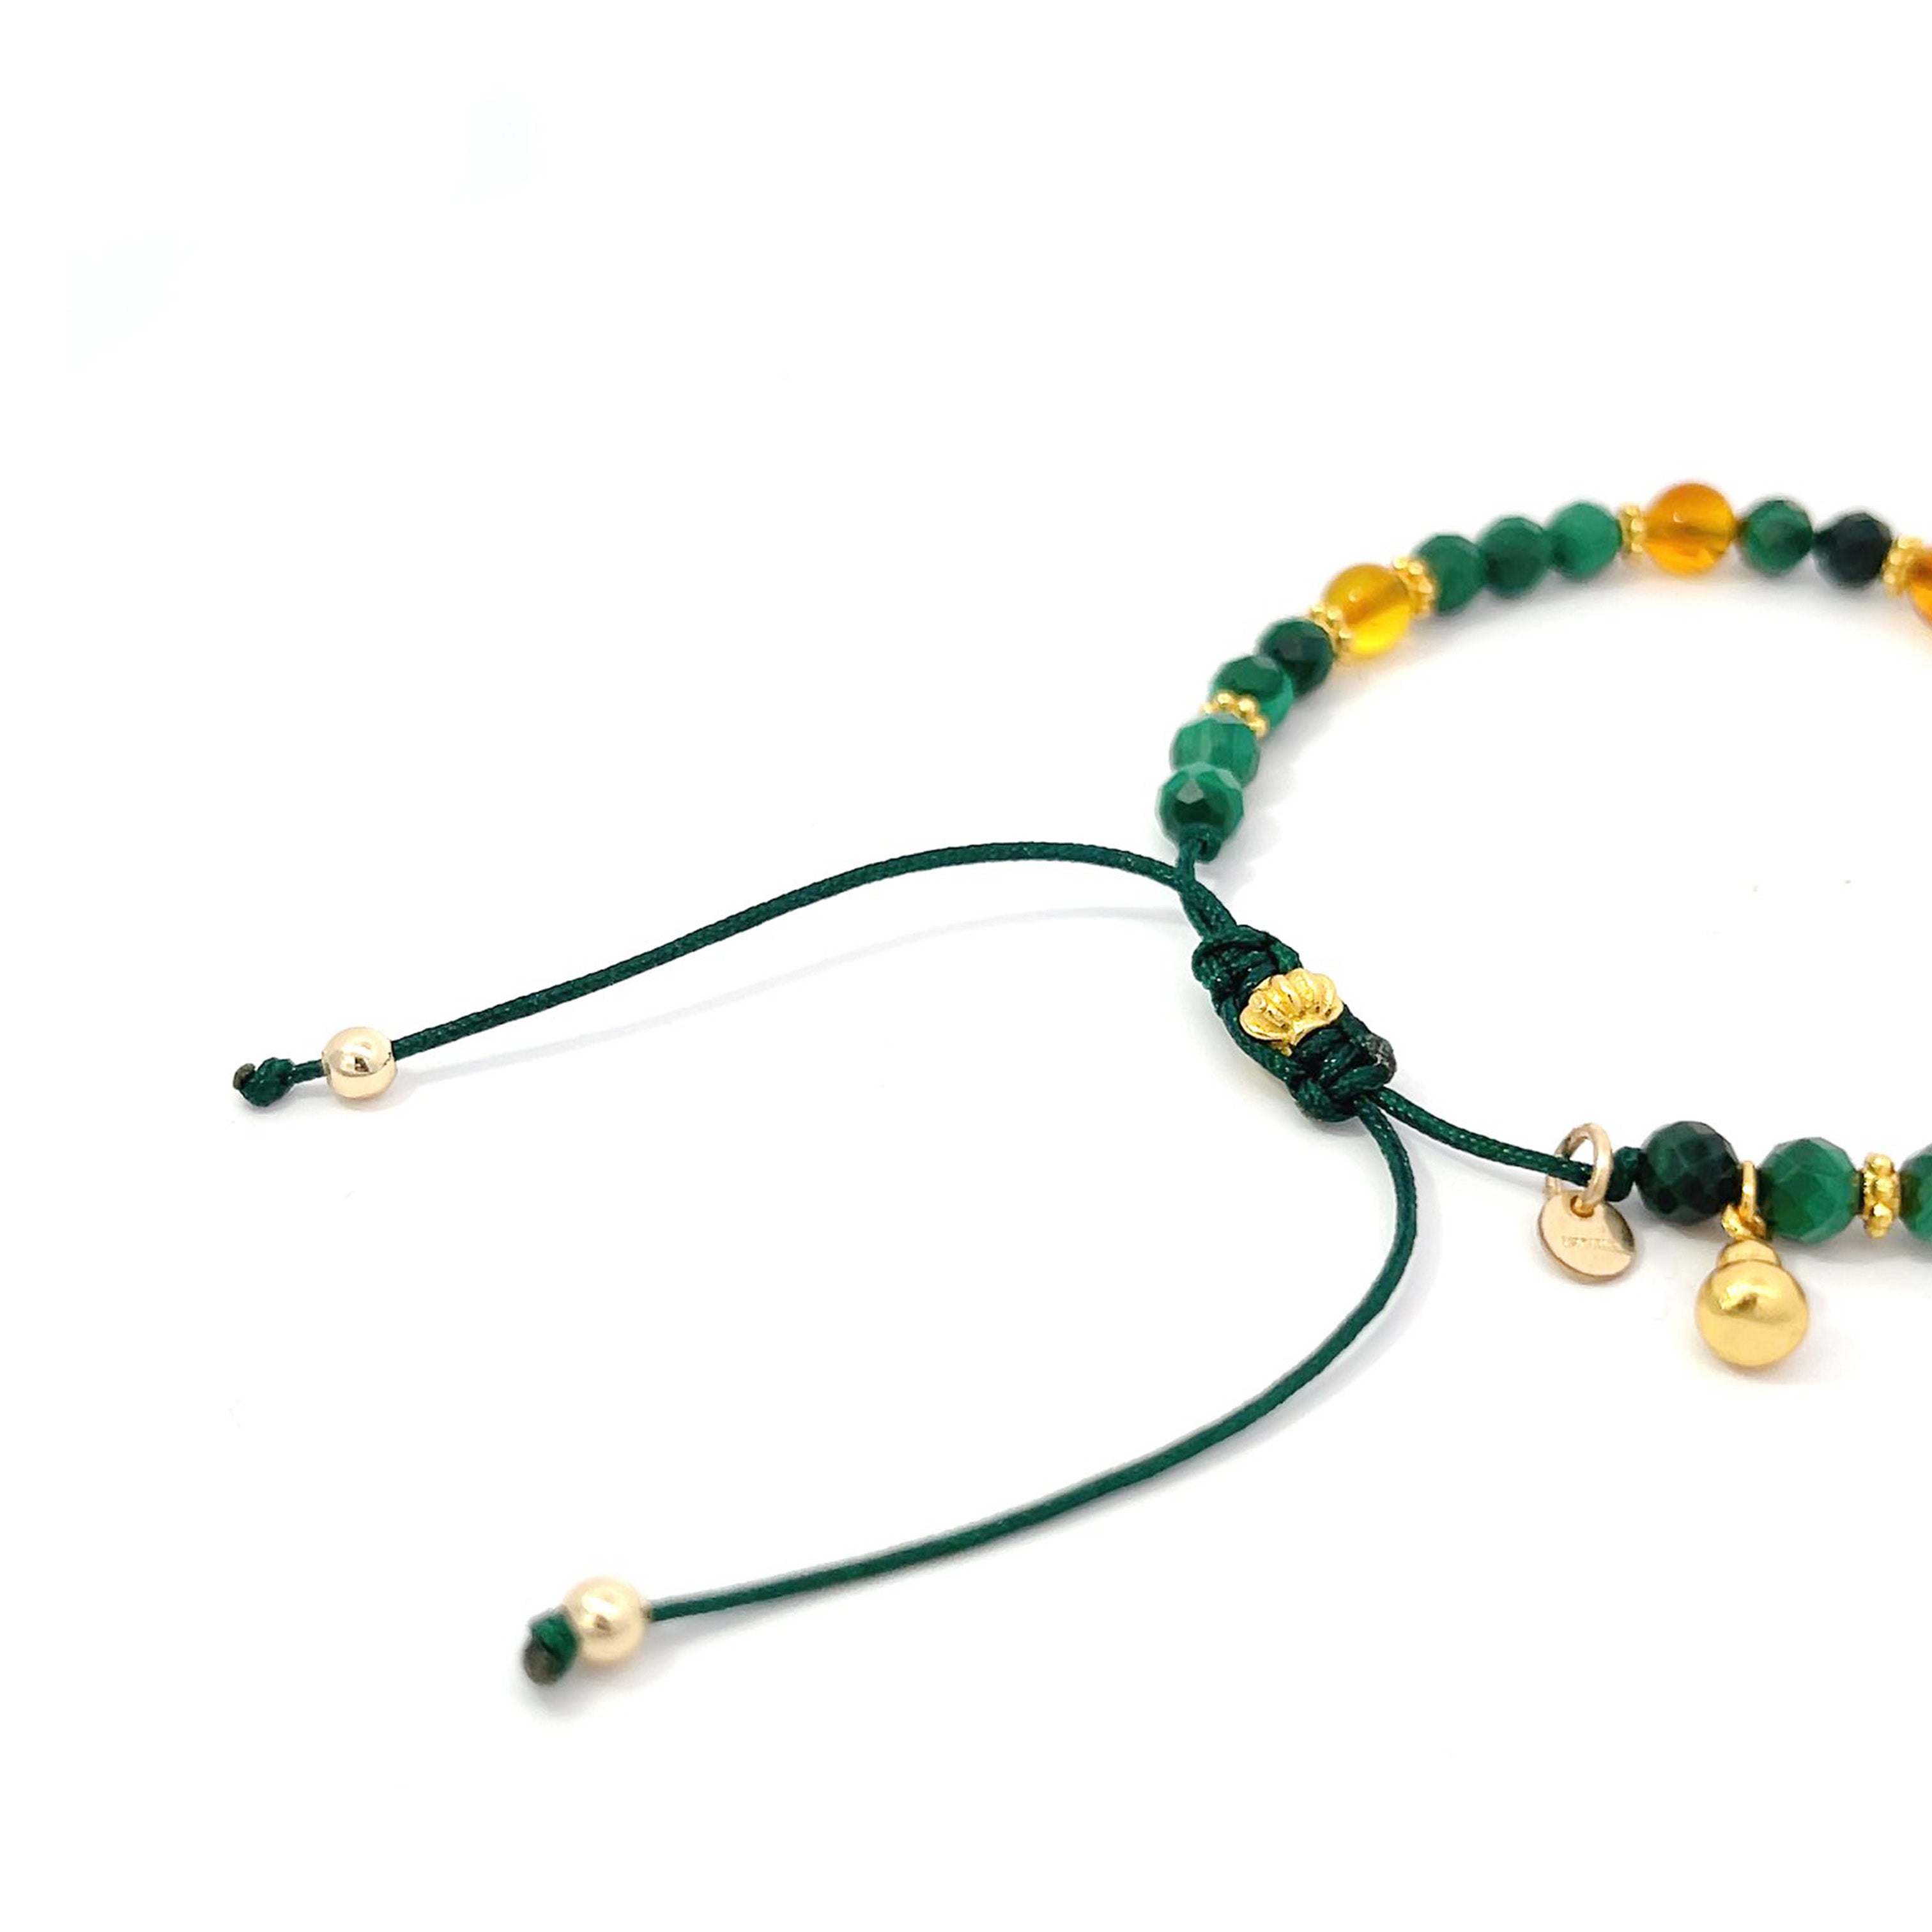 Shop Exclusive Amber and Malachite Pieces